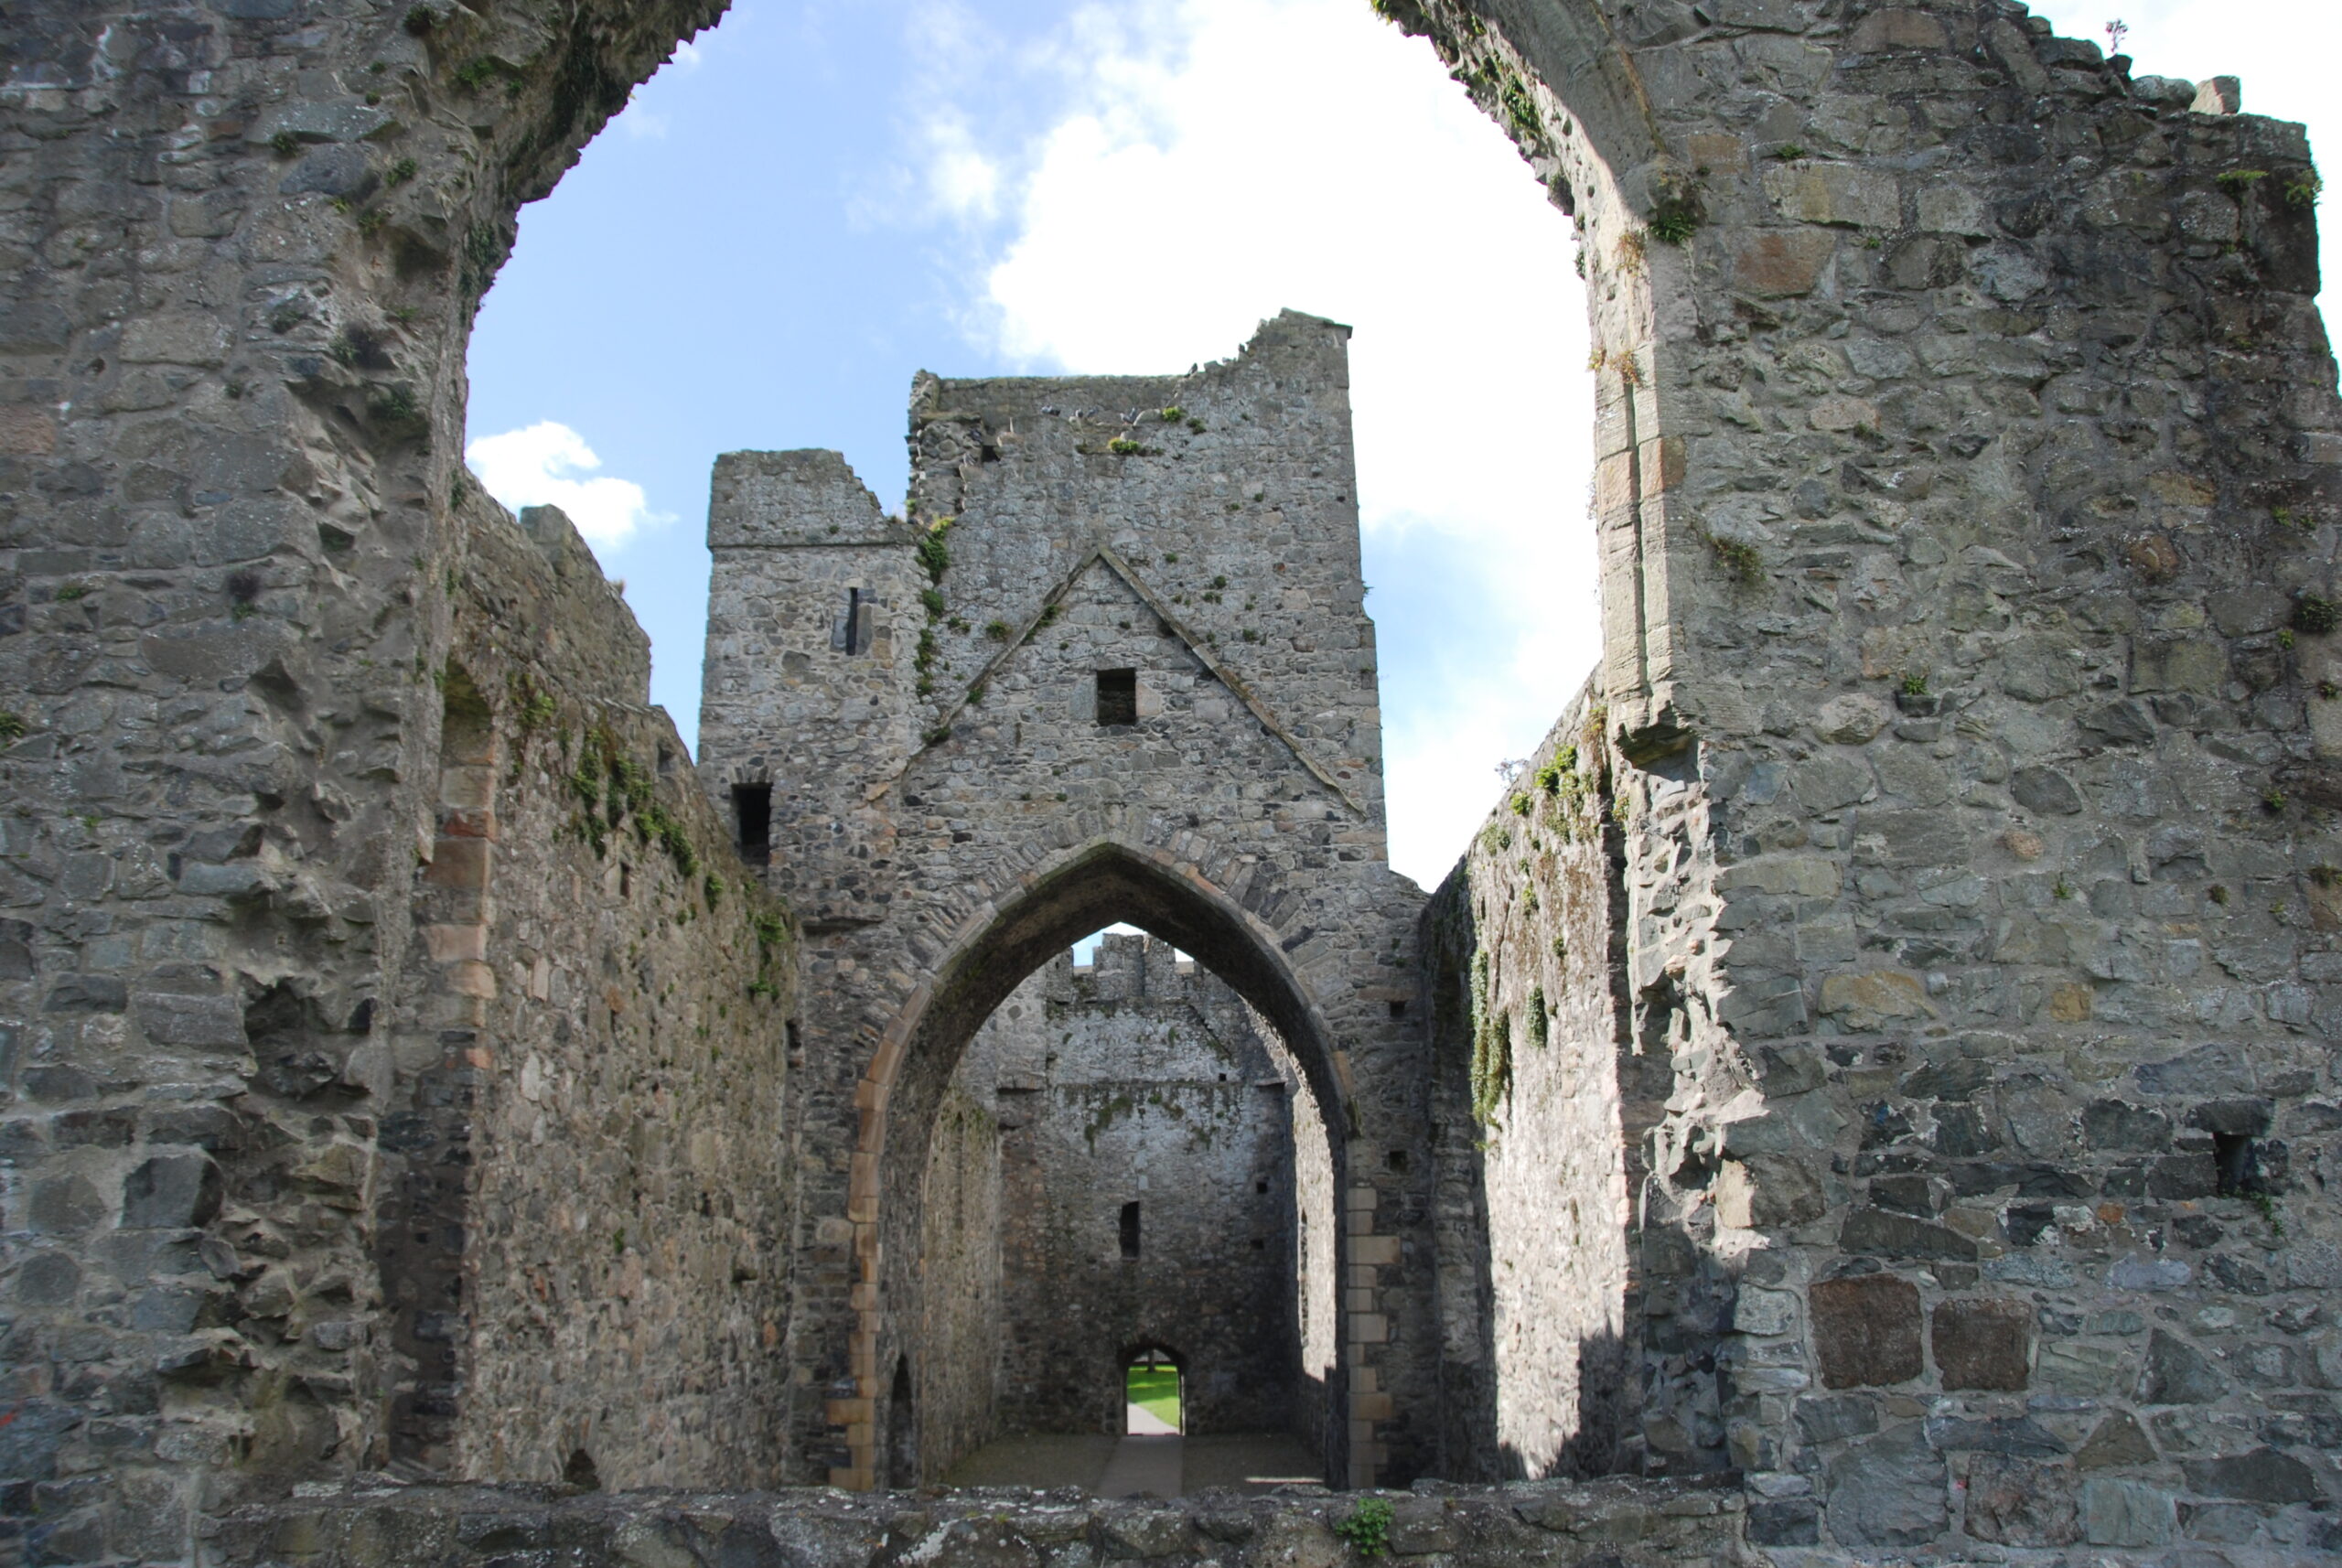 Carlingford Community Newsletter October edition – Carlingford Heritage